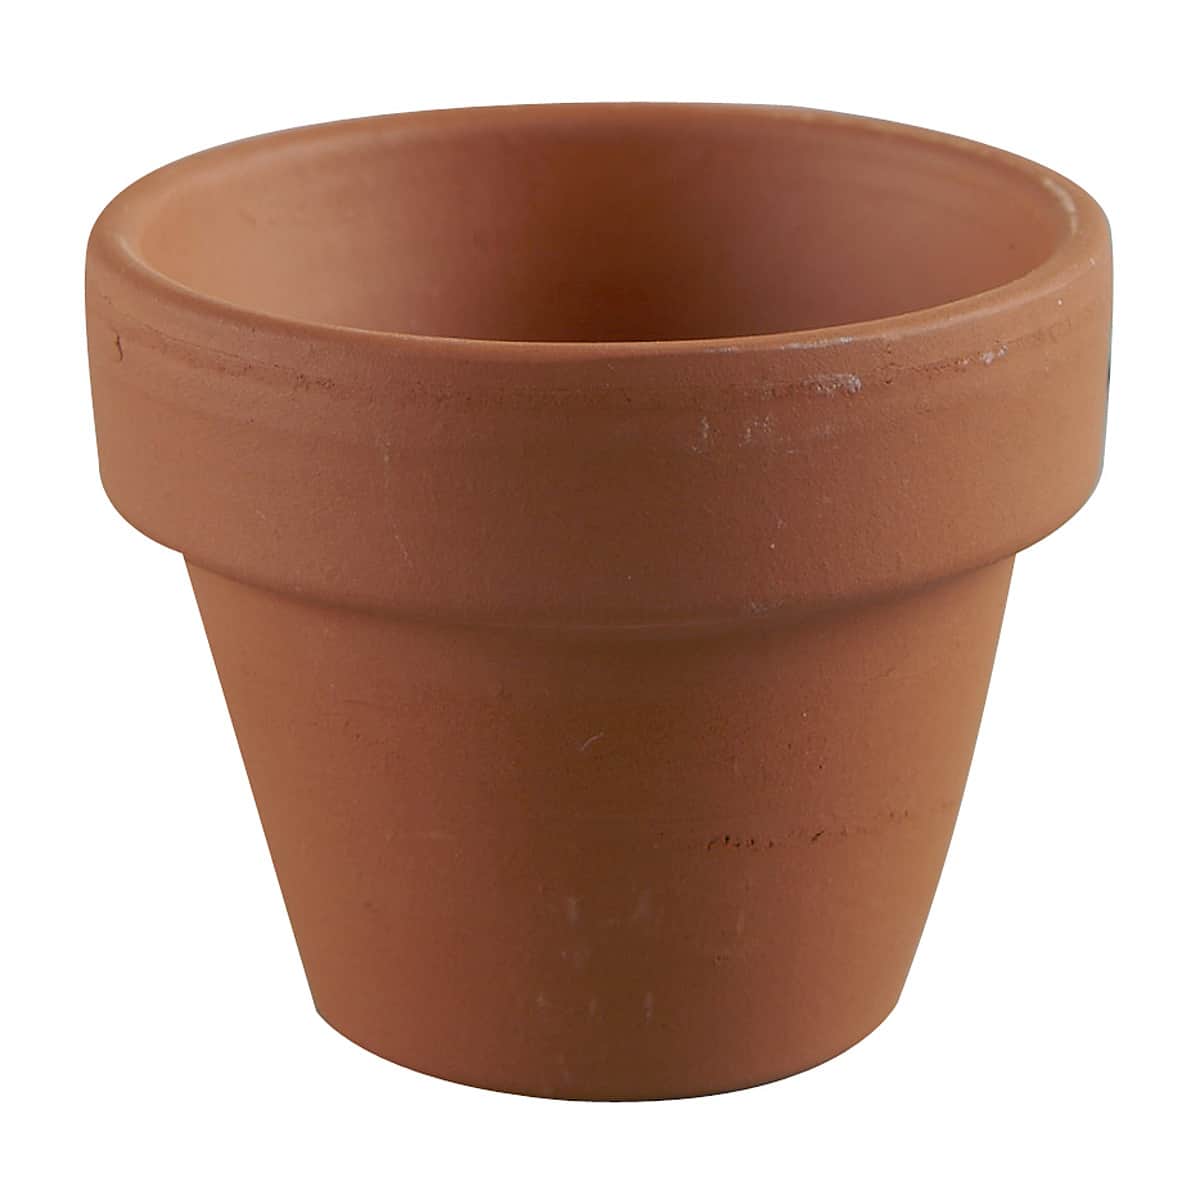 10 - 2.5 x 2.25 Mini Clay Pots - Great for Plants and Crafts